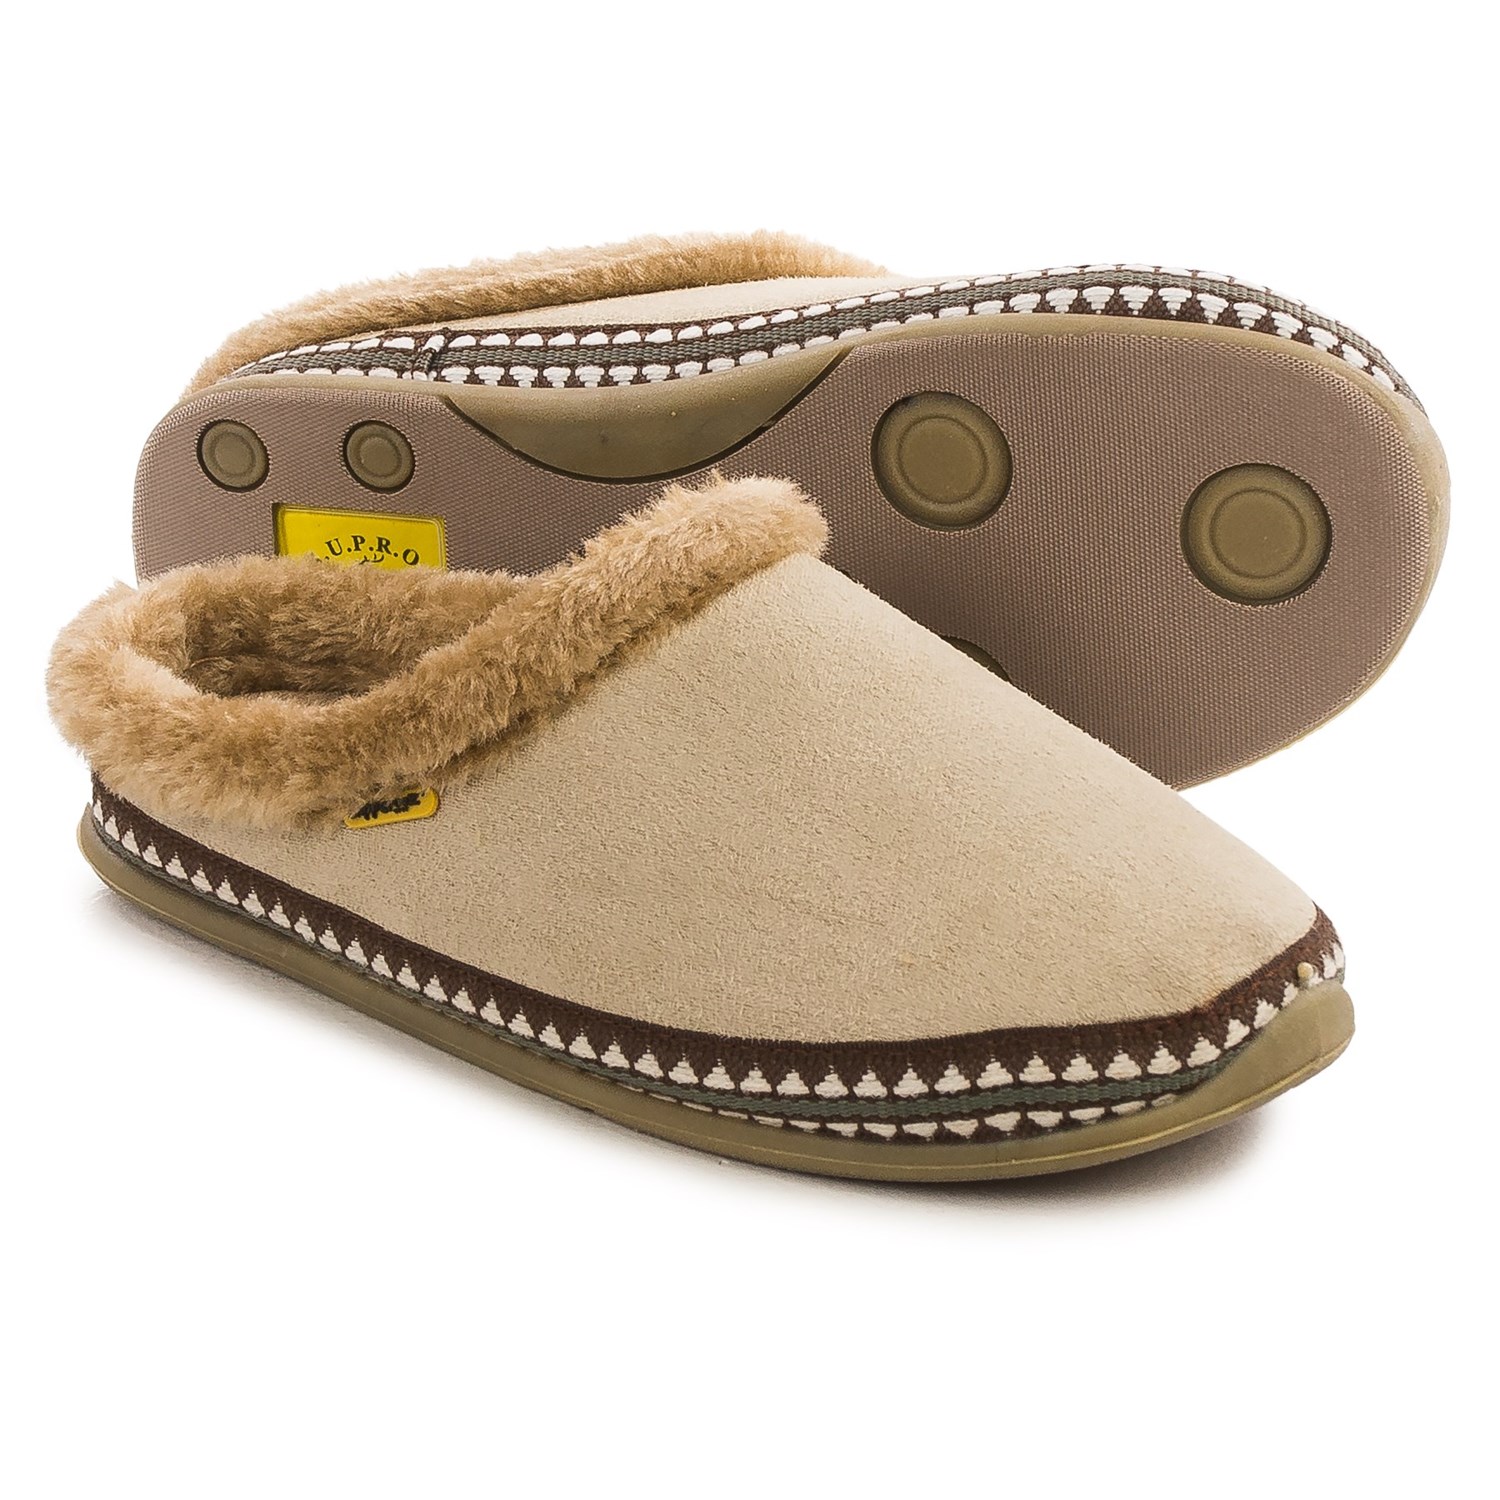 Deer Stags Whenever Slippers (For Women) - Save 62%